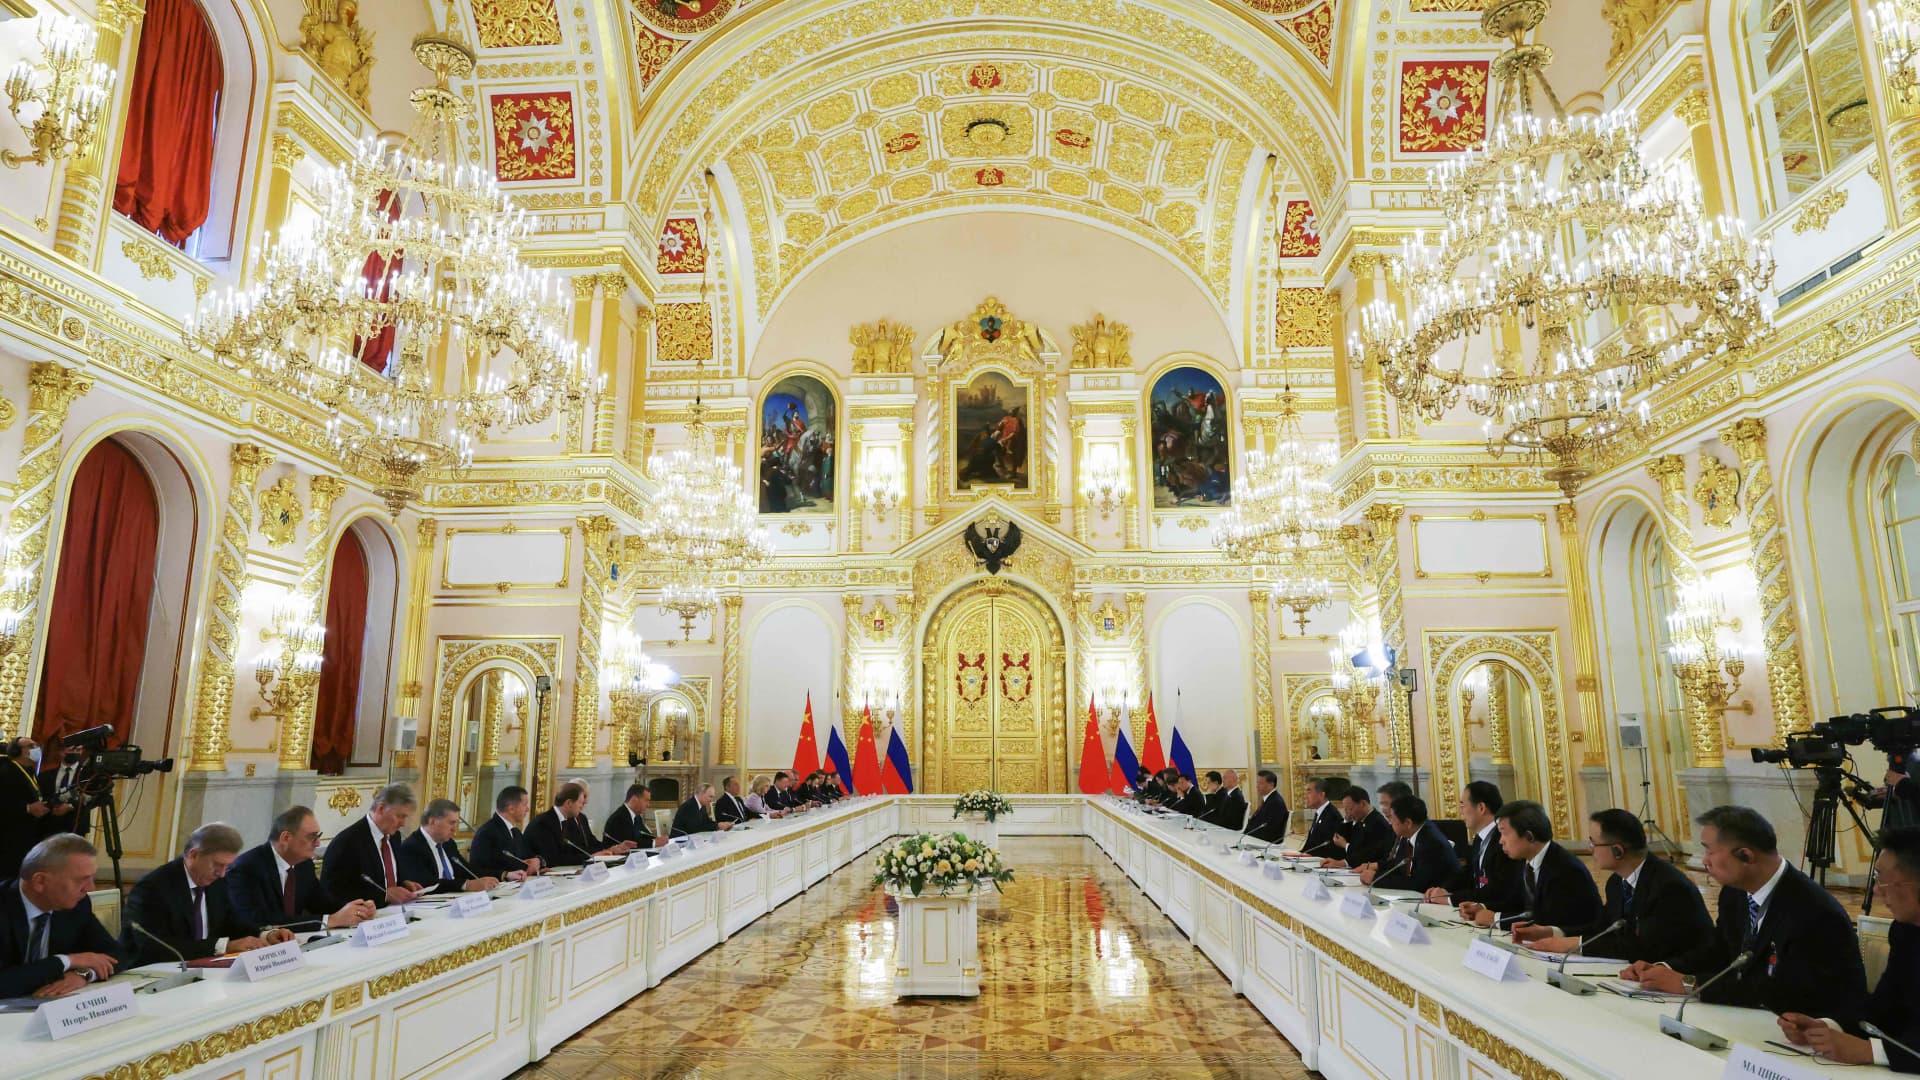 Russian President Vladimir Putin, China's President Xi Jinping and members of the both delegations hold a meeting at the Kremlin in Moscow on March 21, 2023. (Photo by Sergei KARPUKHIN / SPUTNIK / AFP) (Photo by SERGEI KARPUKHIN/SPUTNIK/AFP via Getty Images)